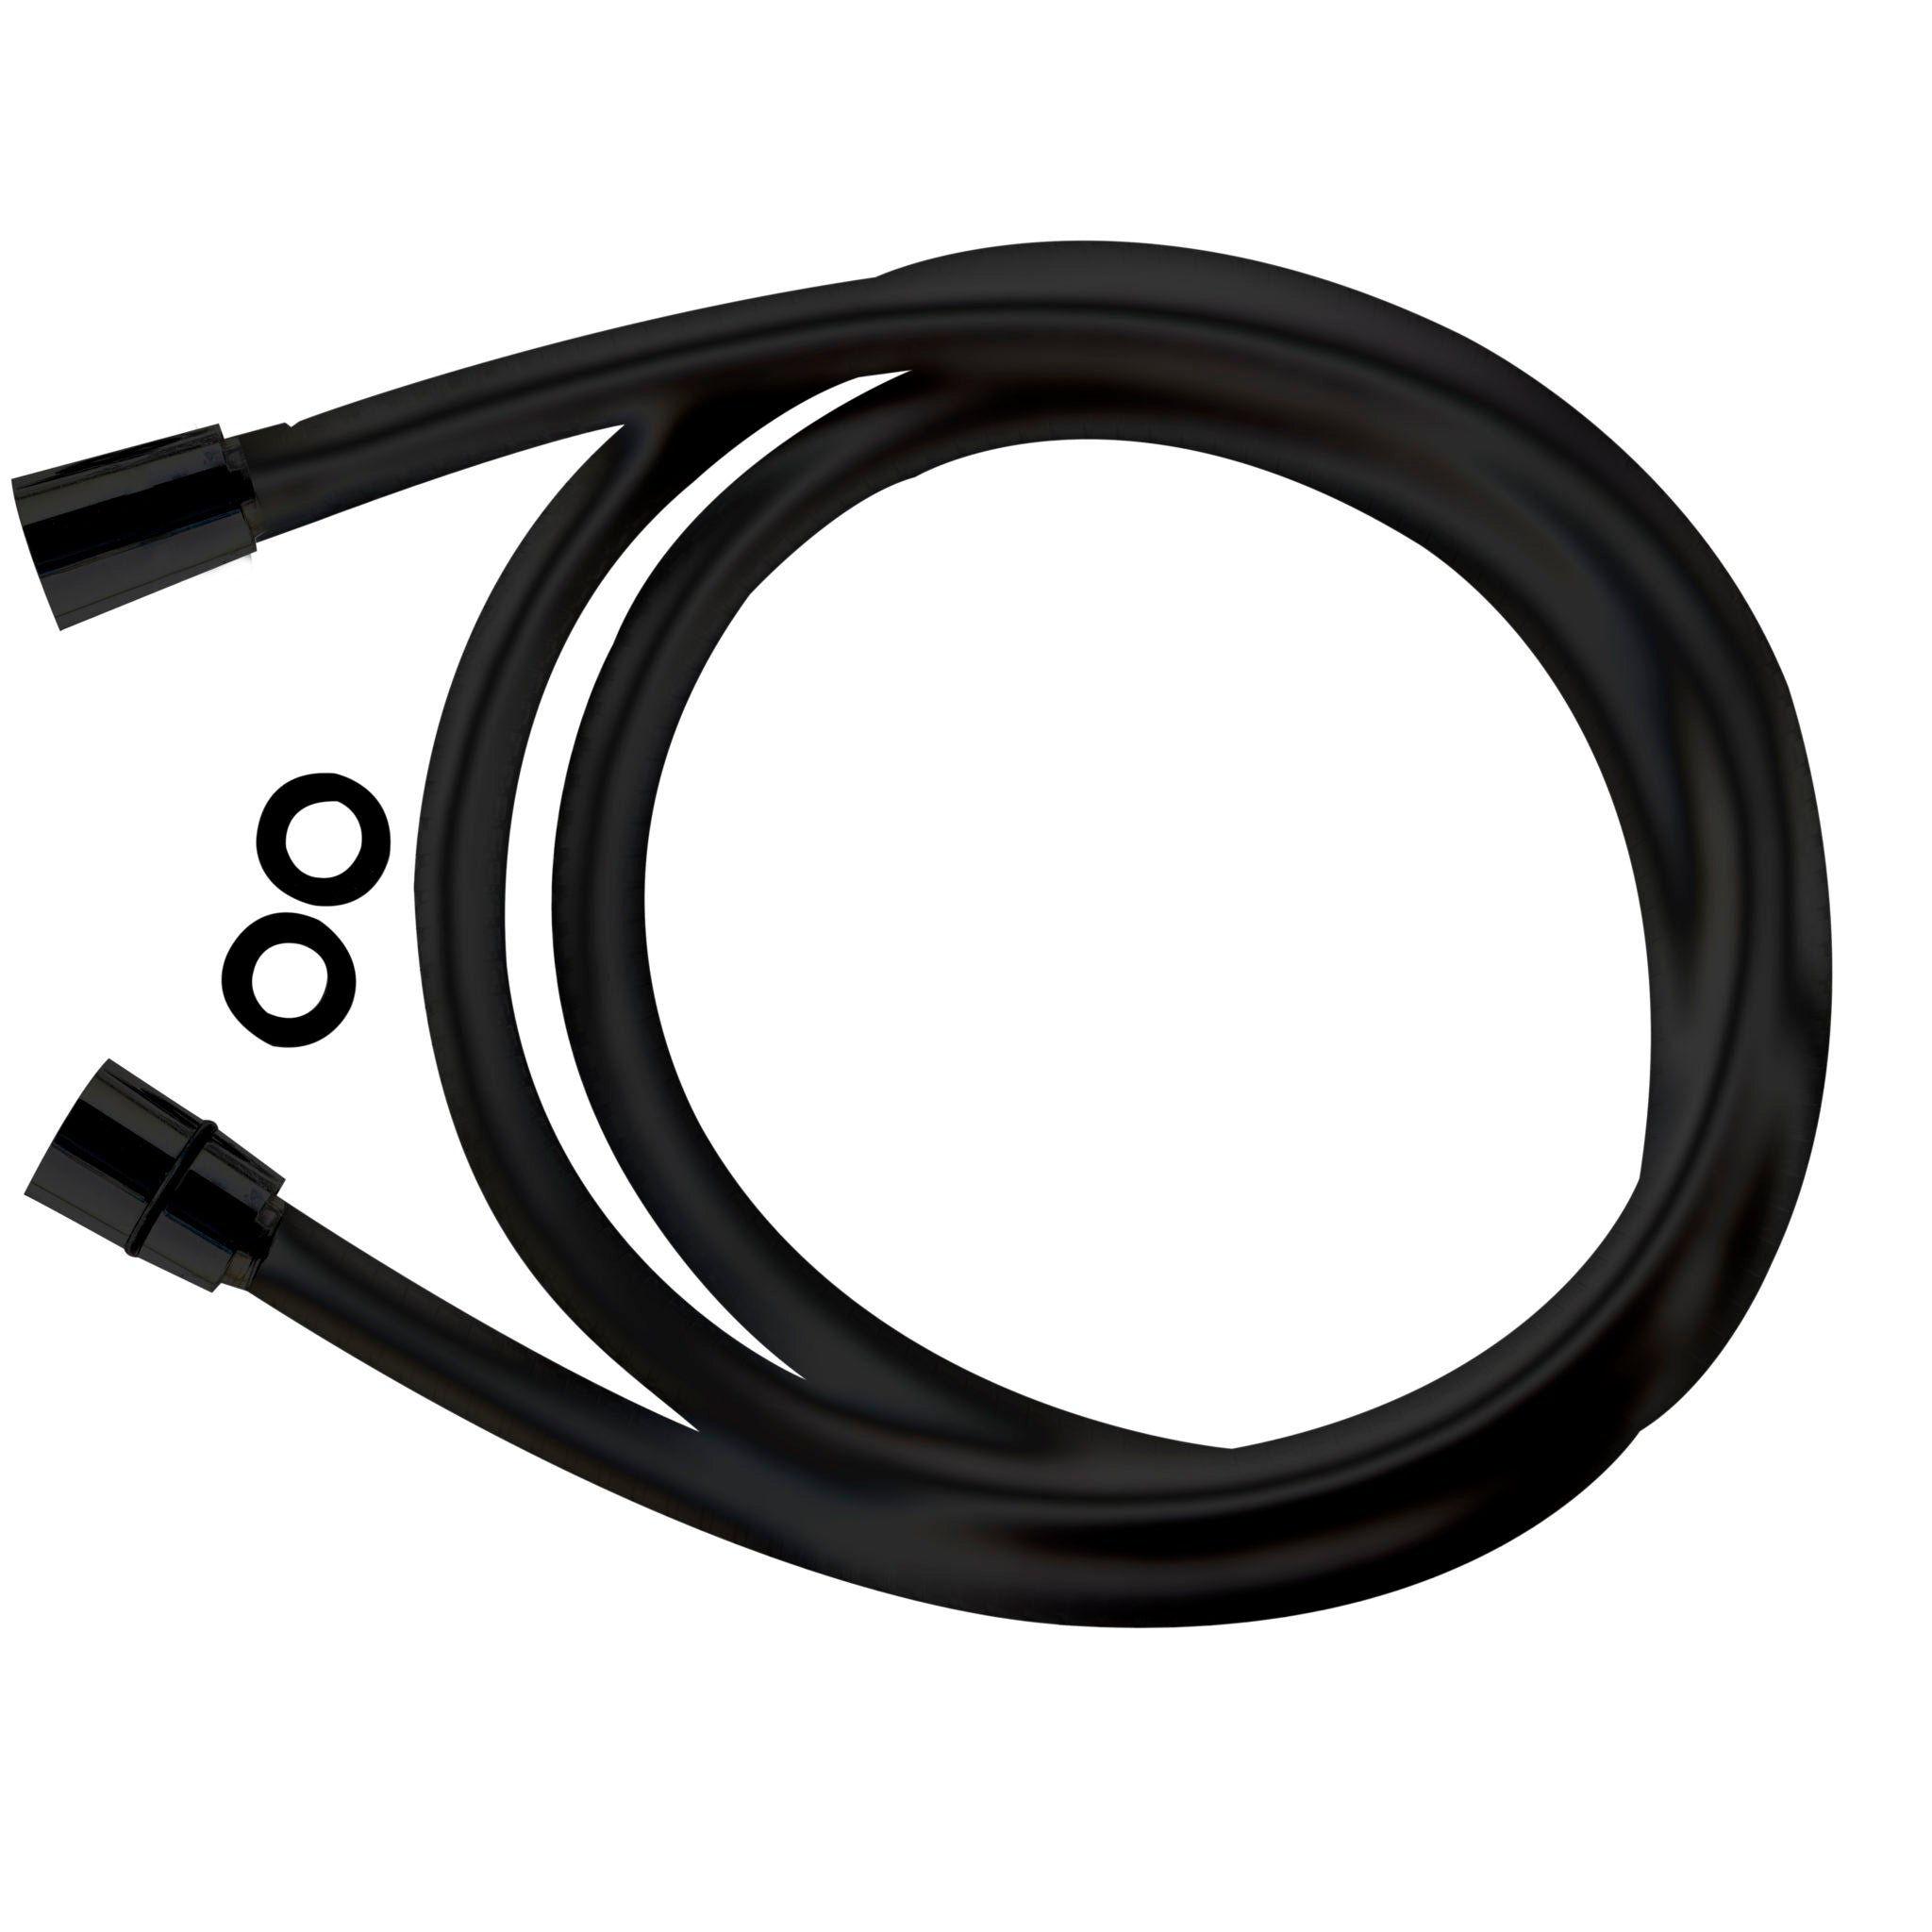 Bélanger 96179MB-P- Flexible Hose - Washers Included